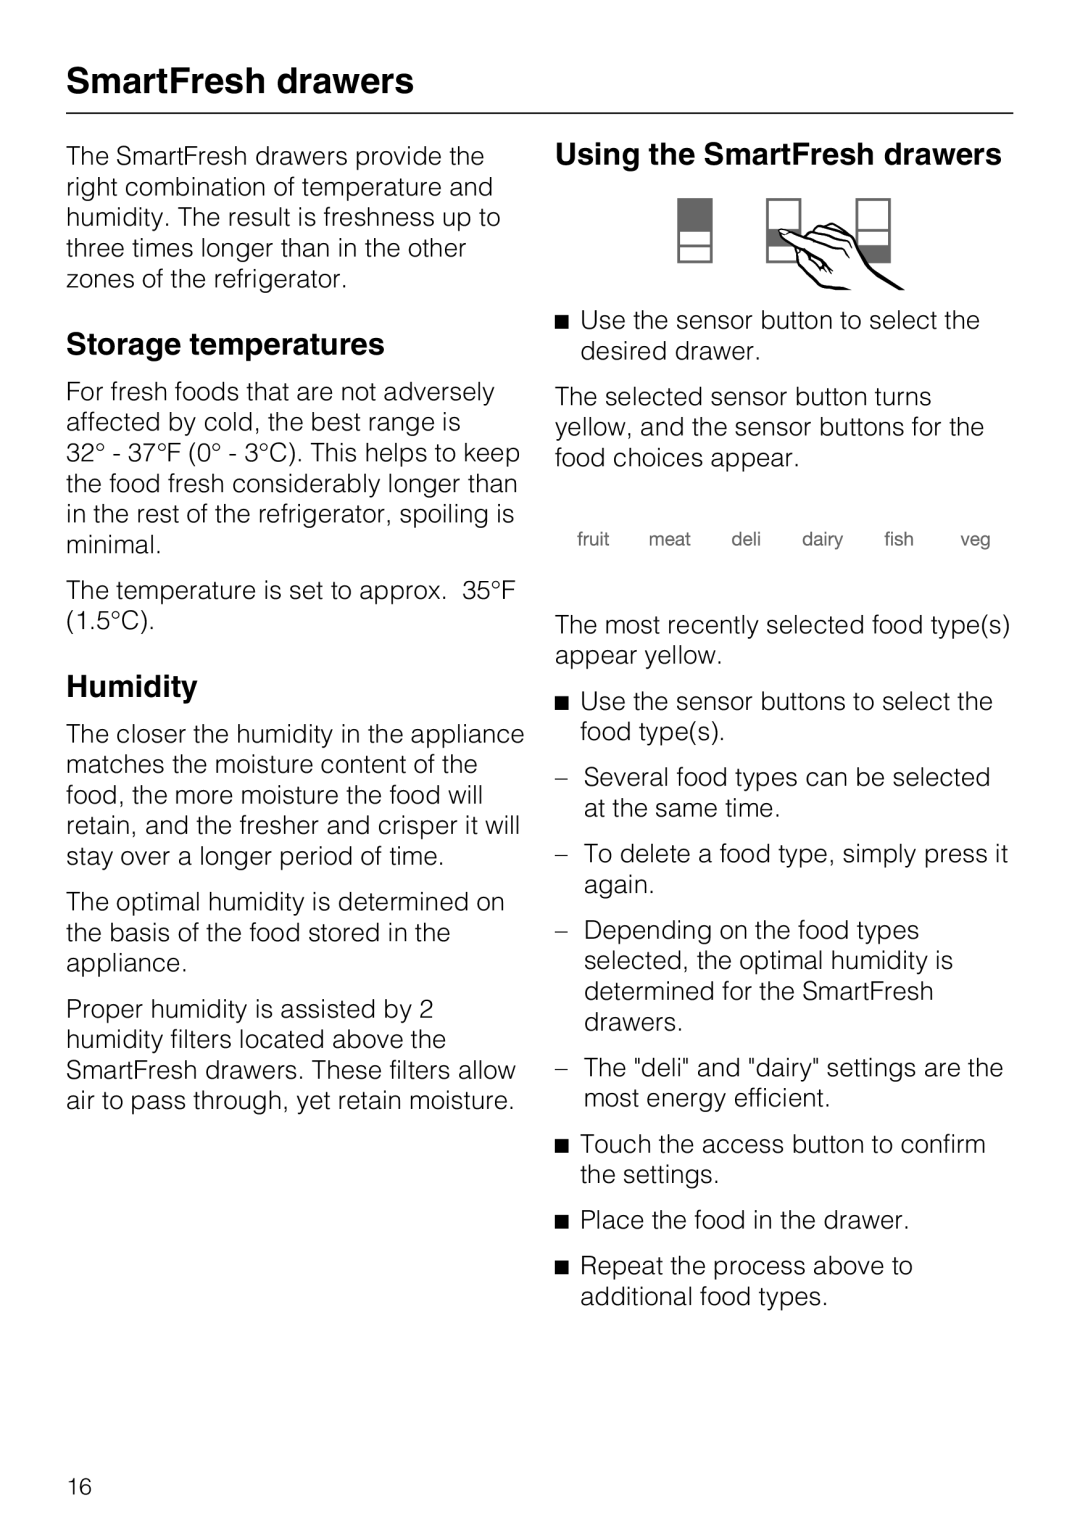 Miele 09 920 570 installation instructions Storage temperatures, Humidity, Using the SmartFresh drawers 